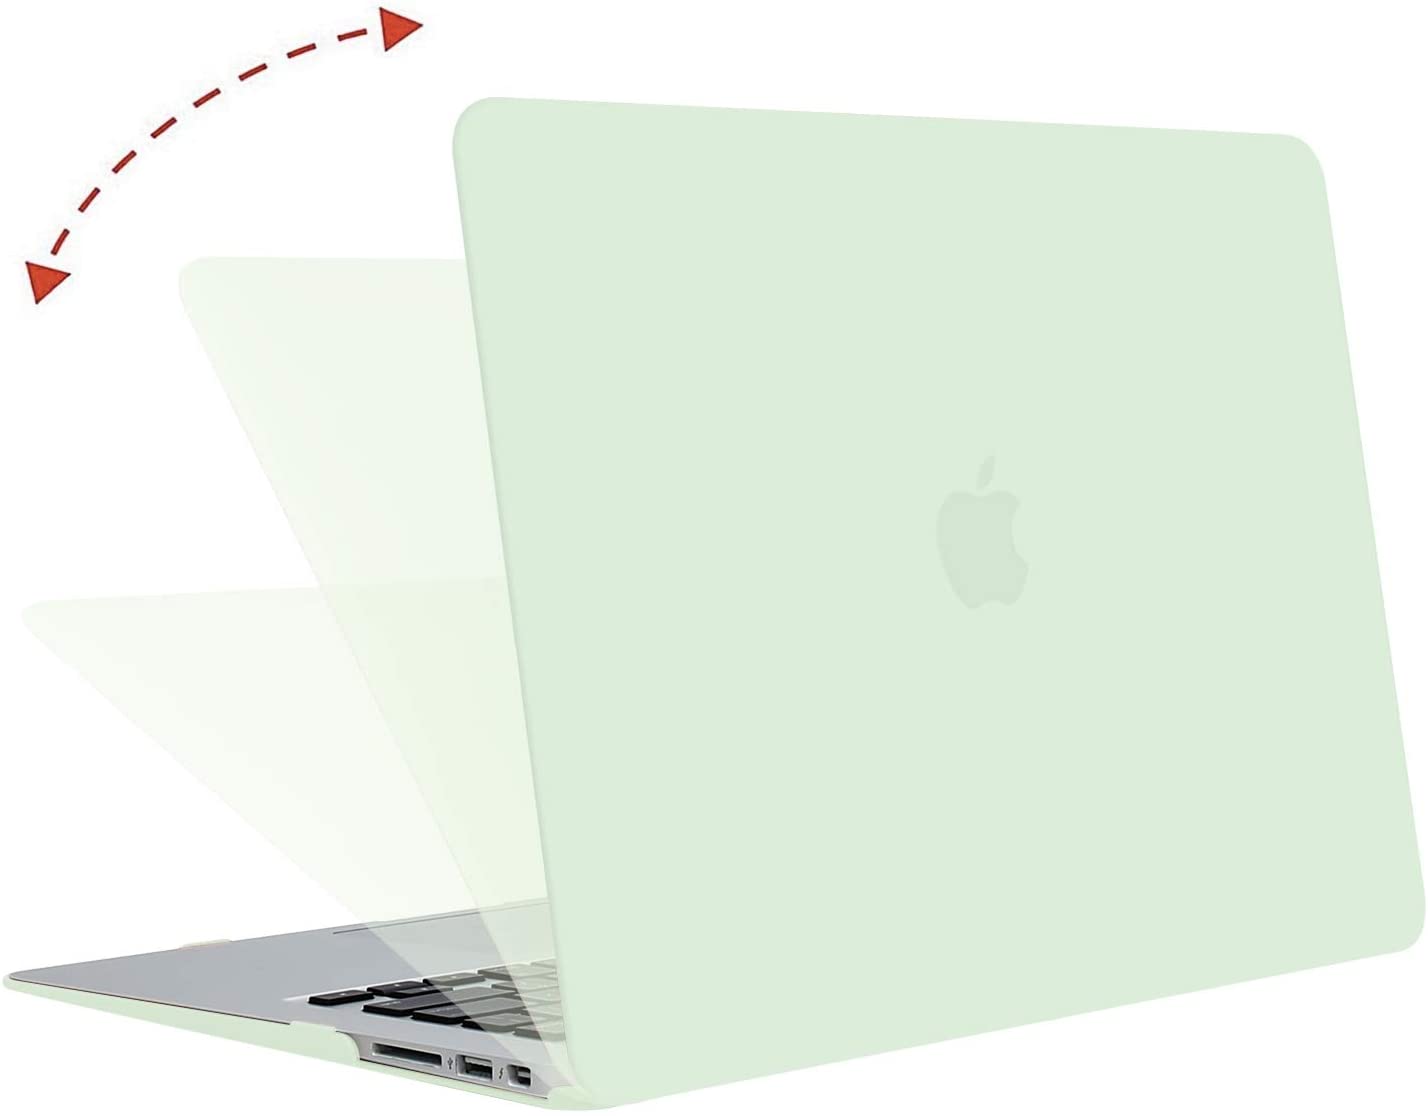 Honeydew Green -  MacBook Air 13 inch Case 2018 -2019 Release. Plastic Pattern Hard Shell , screen and keyboard protectors Compatible with MacBook Air 13. - e4cents